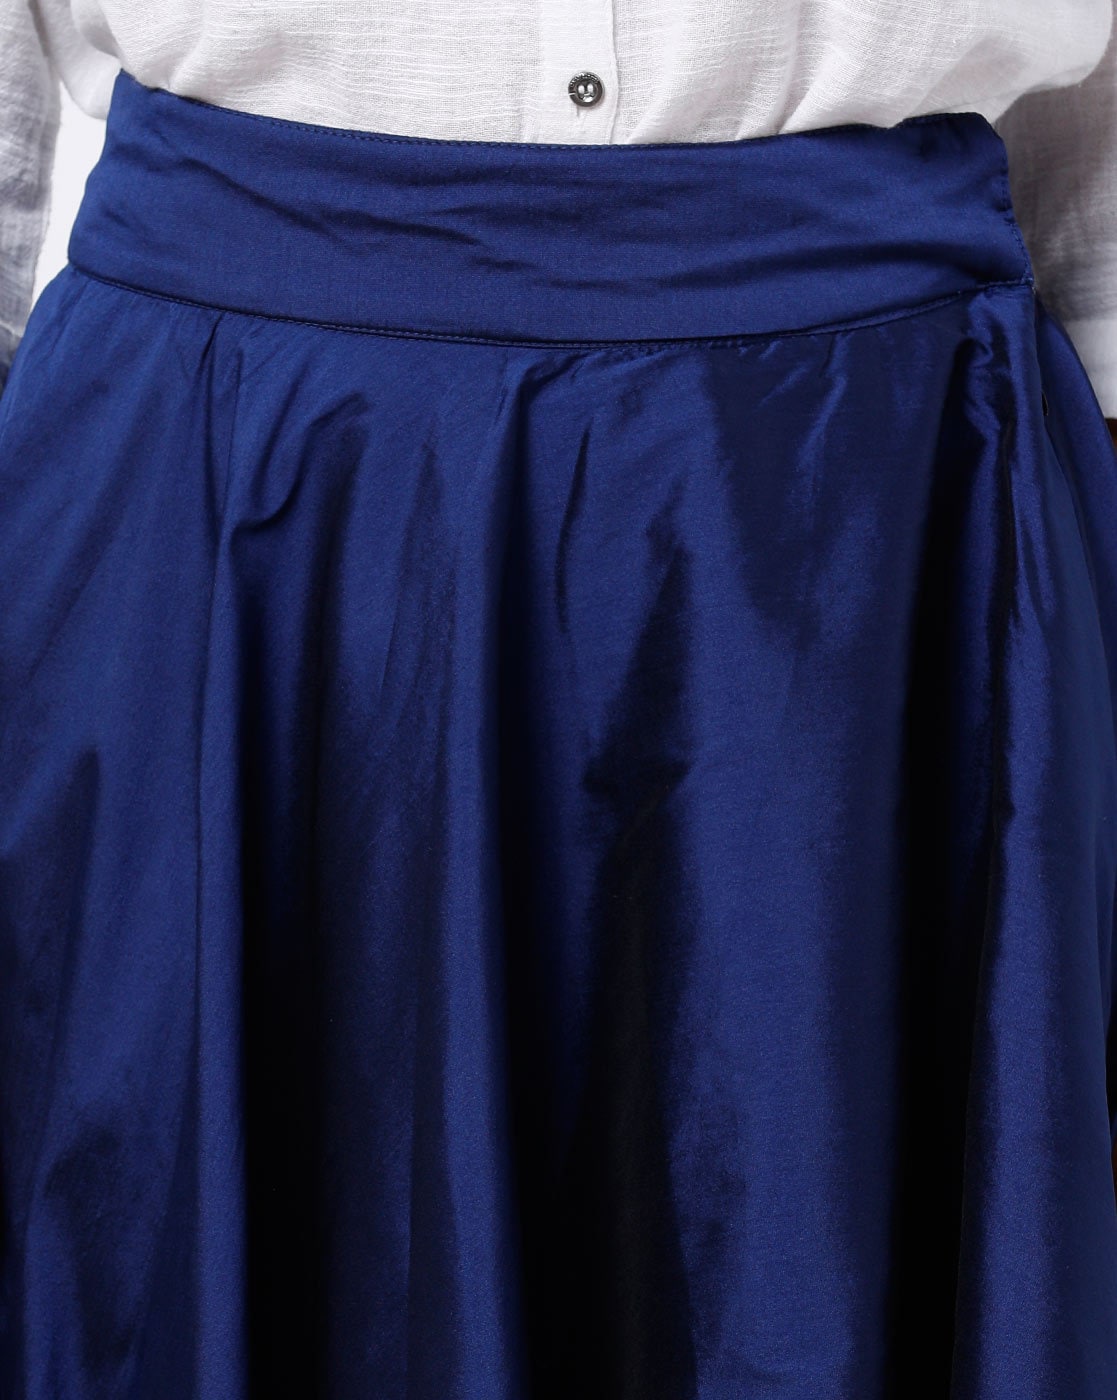 Buy De Moza Womens Solid Polyester Royal Blue Skirt online